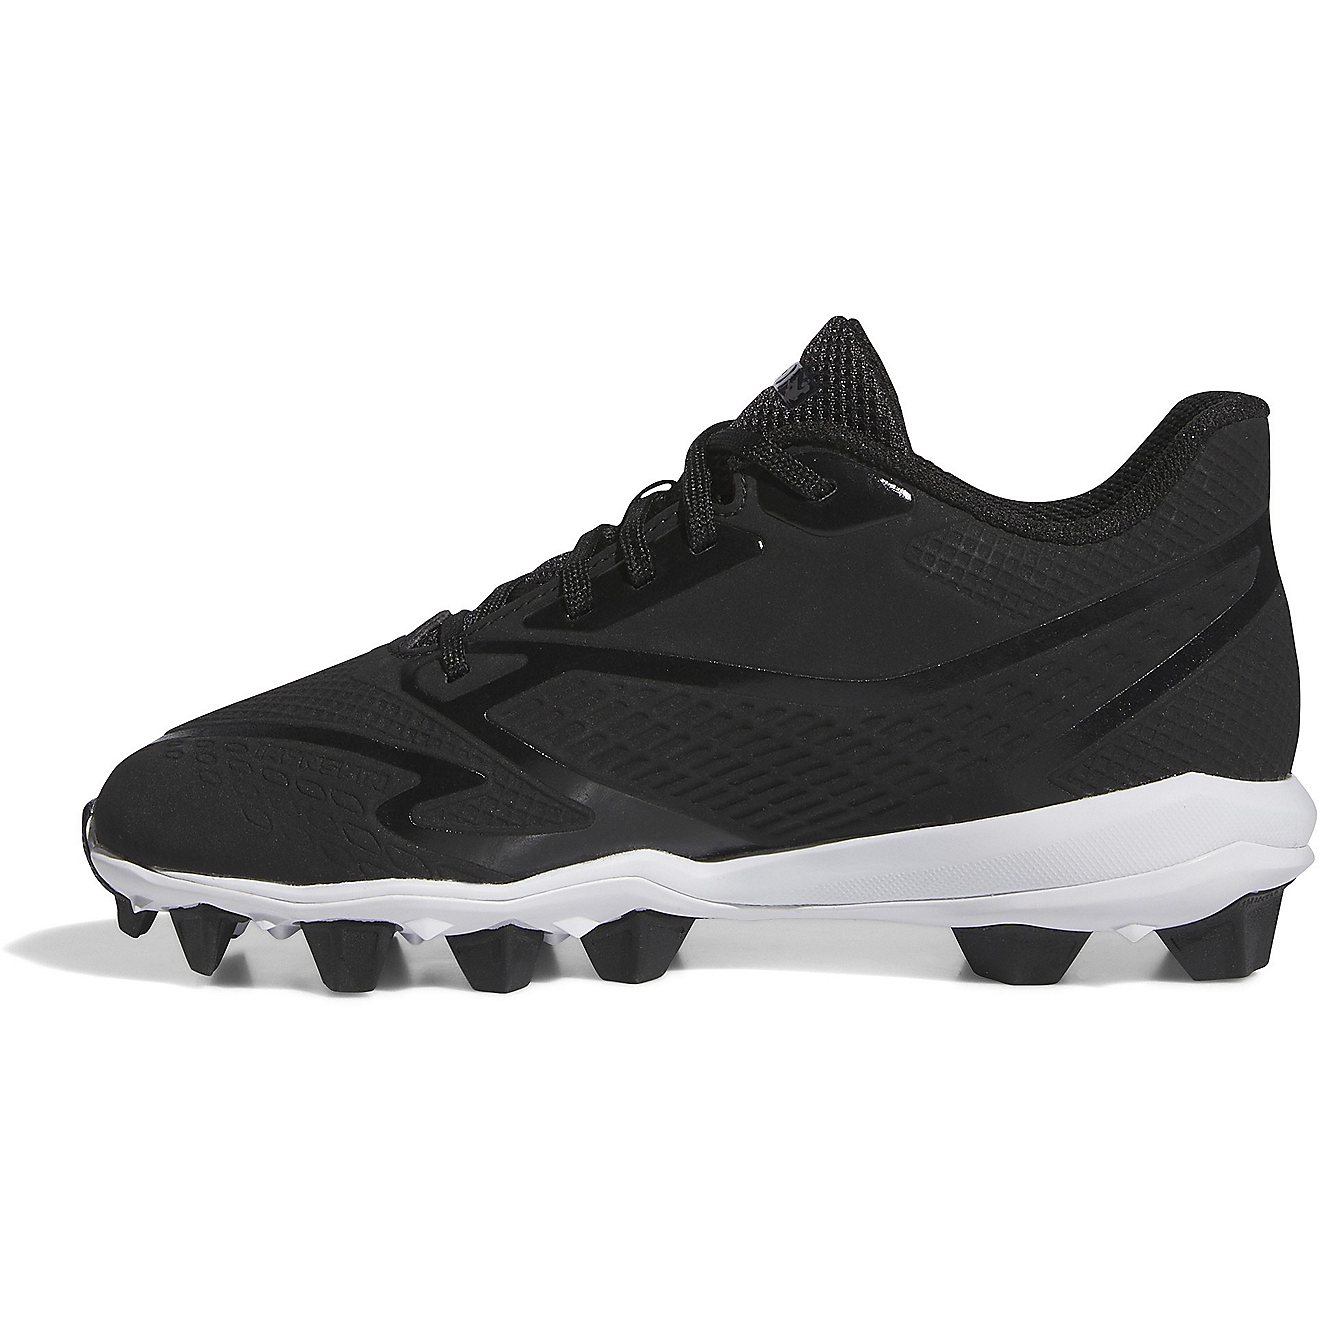 adidas Boys’ Icon 8 MD Baseball Cleats                                                                                         - view number 2